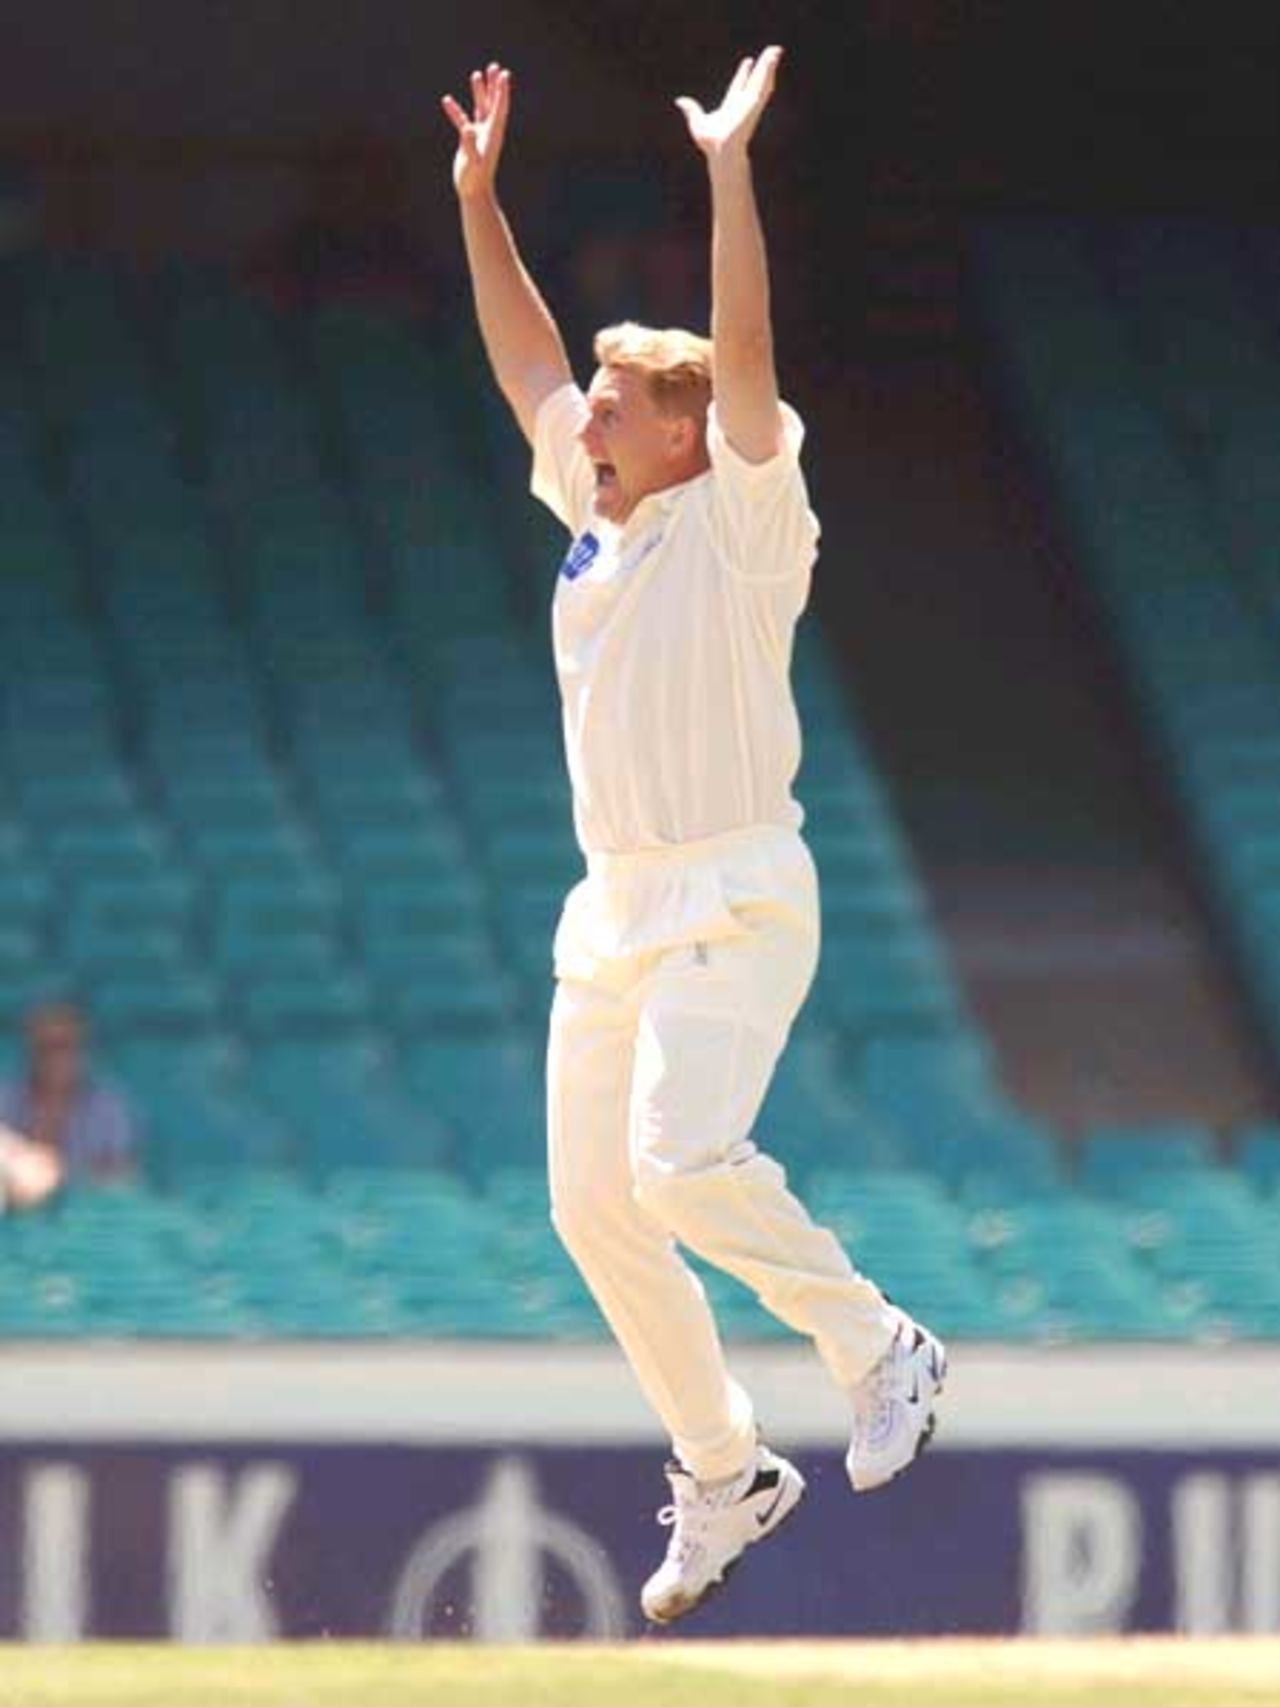 17 Oct 2001: Shane Lee of the Blues appeals during day one of the Pura Cup cricket match between the New South Wales Blues and the Tasmanian Tigers held at the Sydney Cricket Ground, Sydney, Australia.